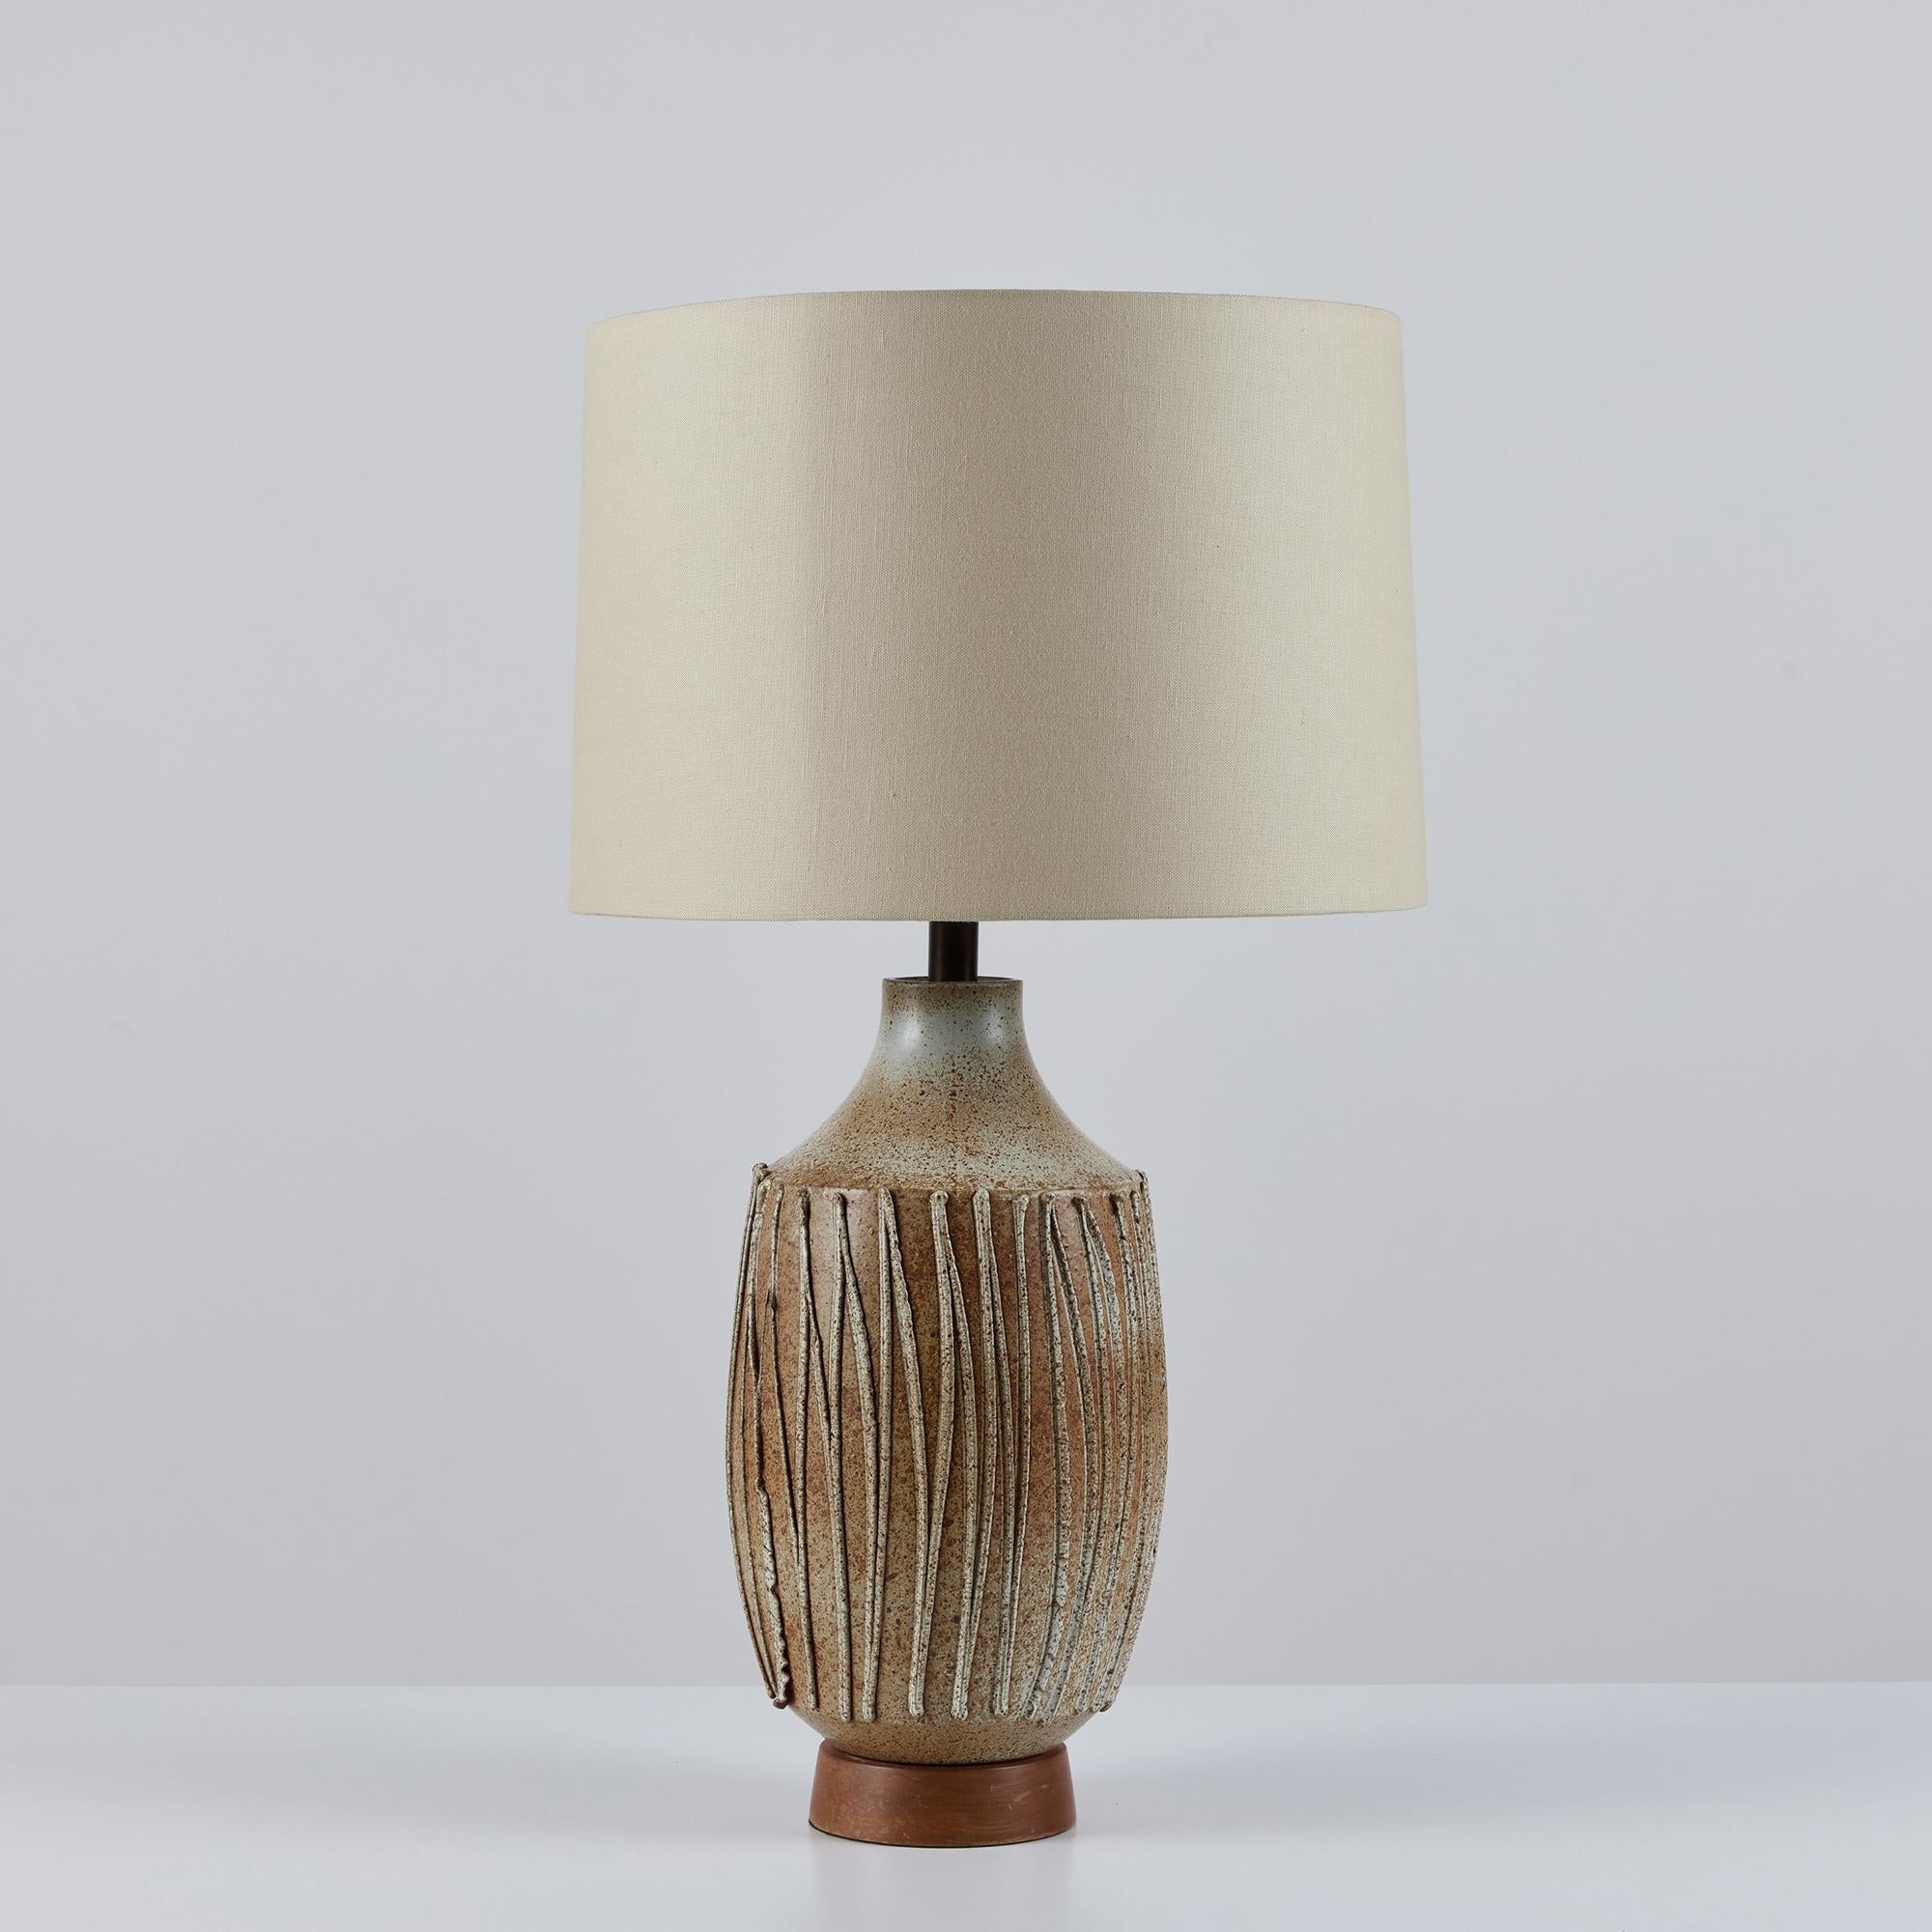 David Cressey stoneware lamp, c.1960s, USA. The wheel thrown stoneware lamp features a speckled cream glaze with applied textured drip details. The ceramic form sits atop a turned oiled walnut base. The newly rewired lamp showcases a new linen